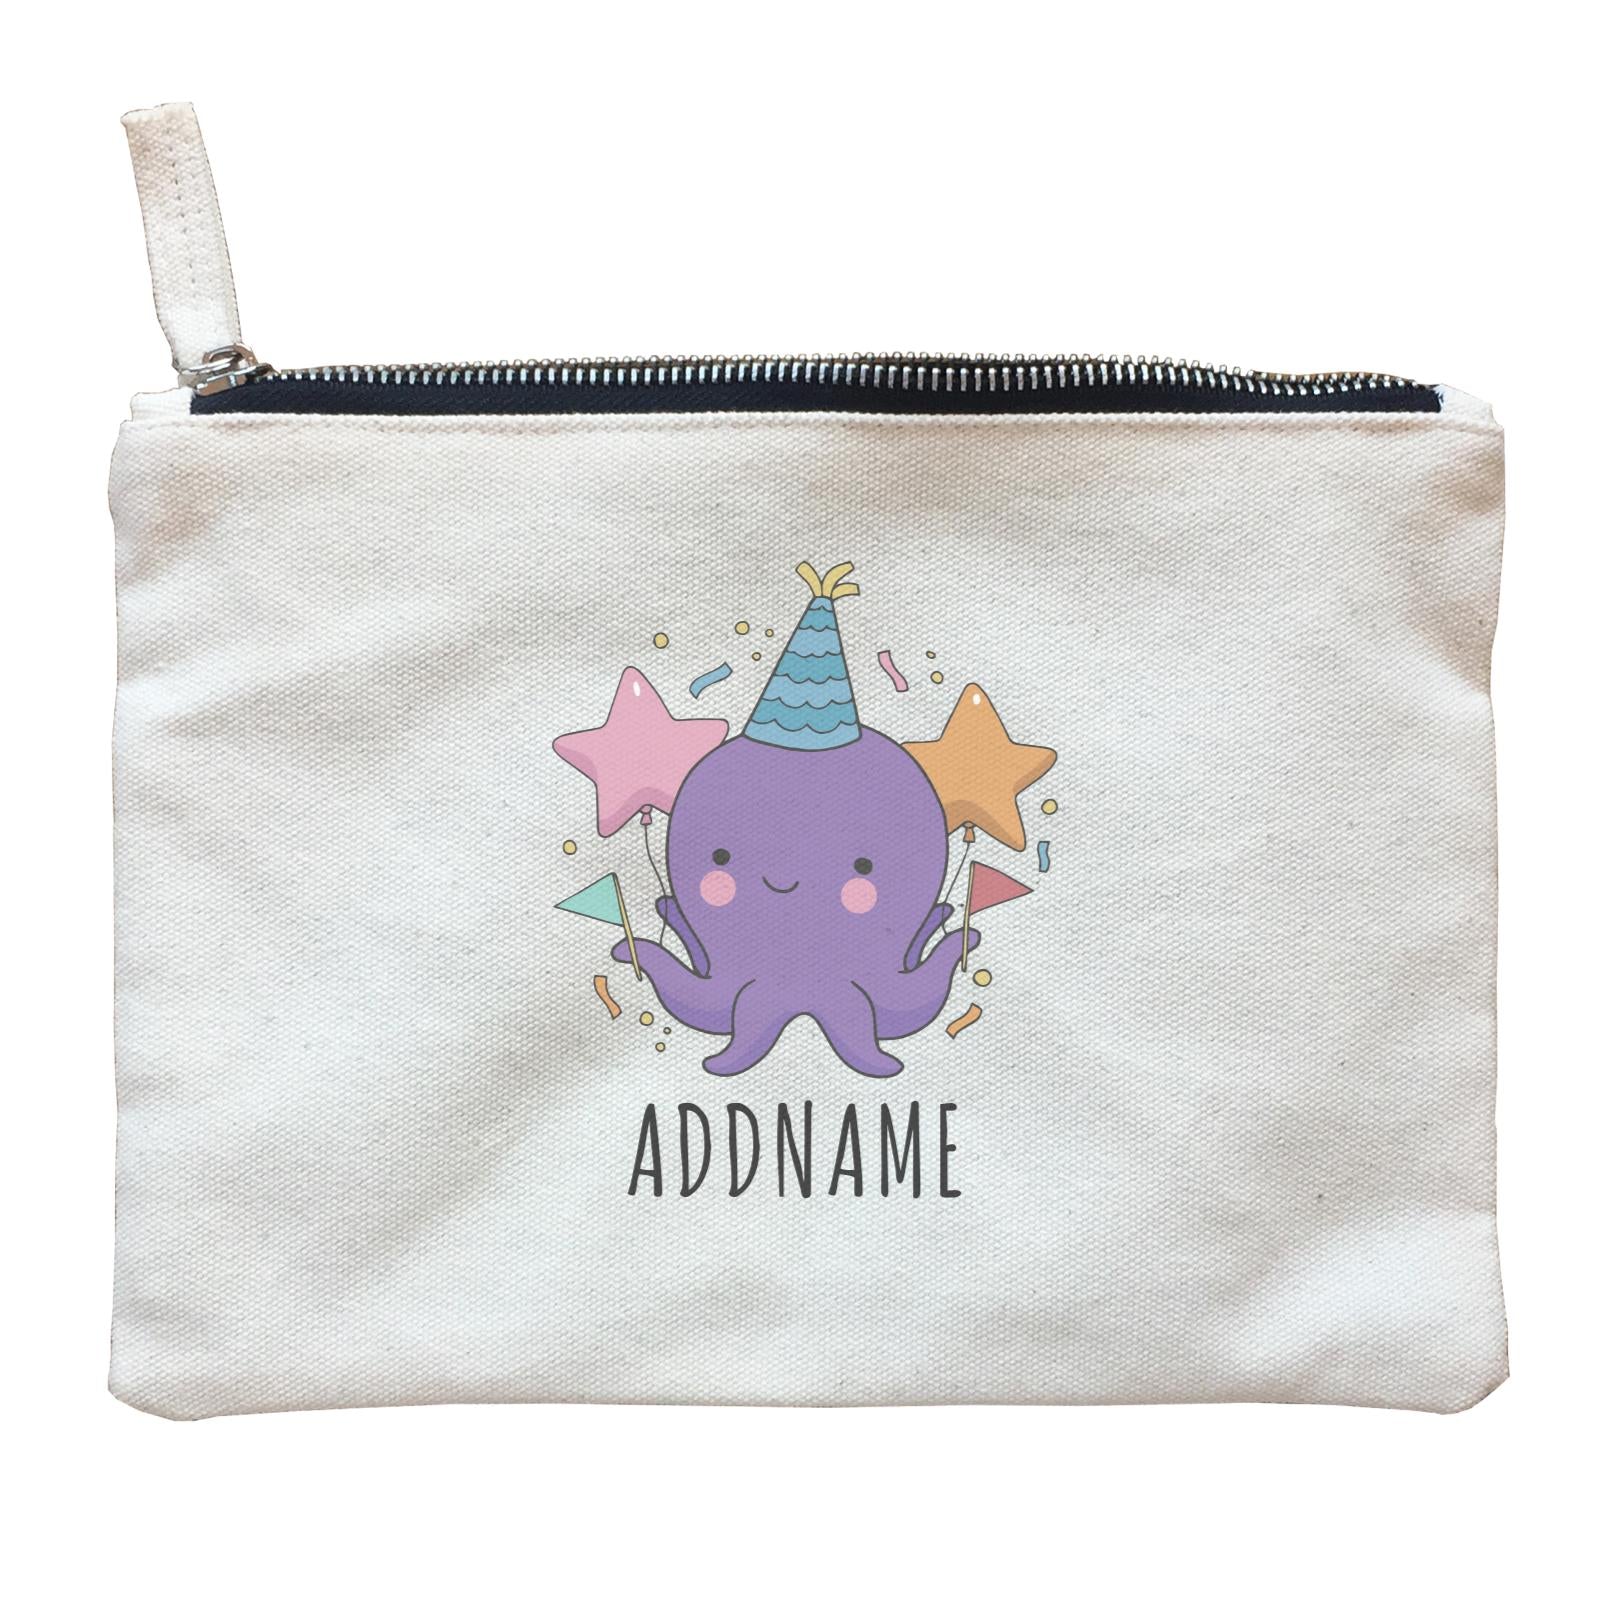 Birthday Sketch Animals Octopus with Flags Addname Zipper Pouch